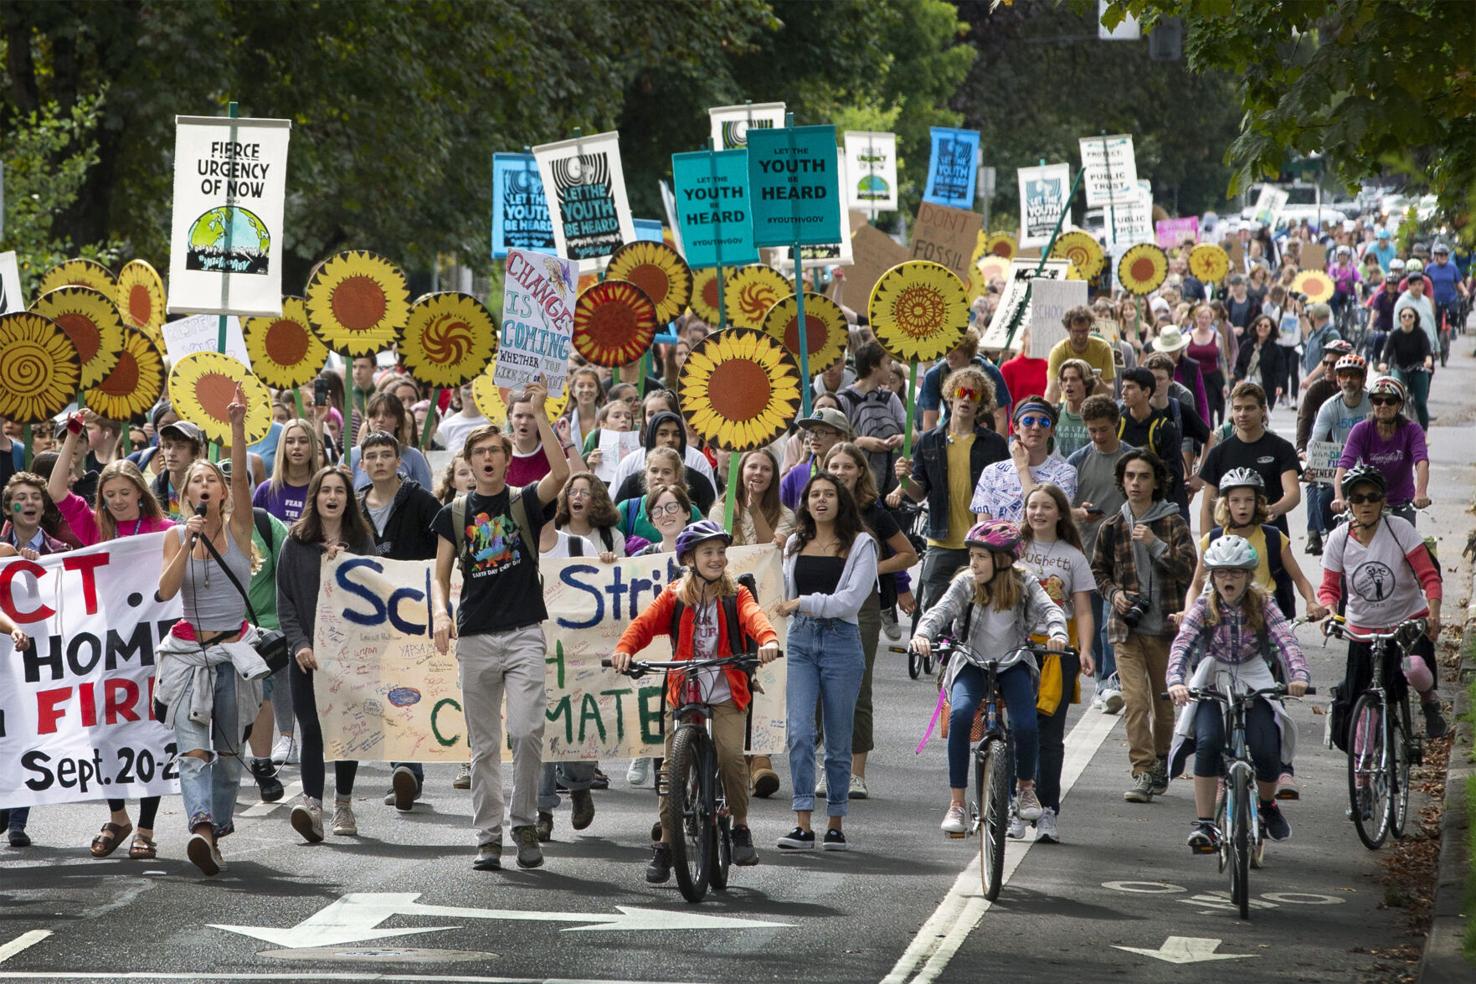 'I want a future': Global youth protests urge climate action | National ...